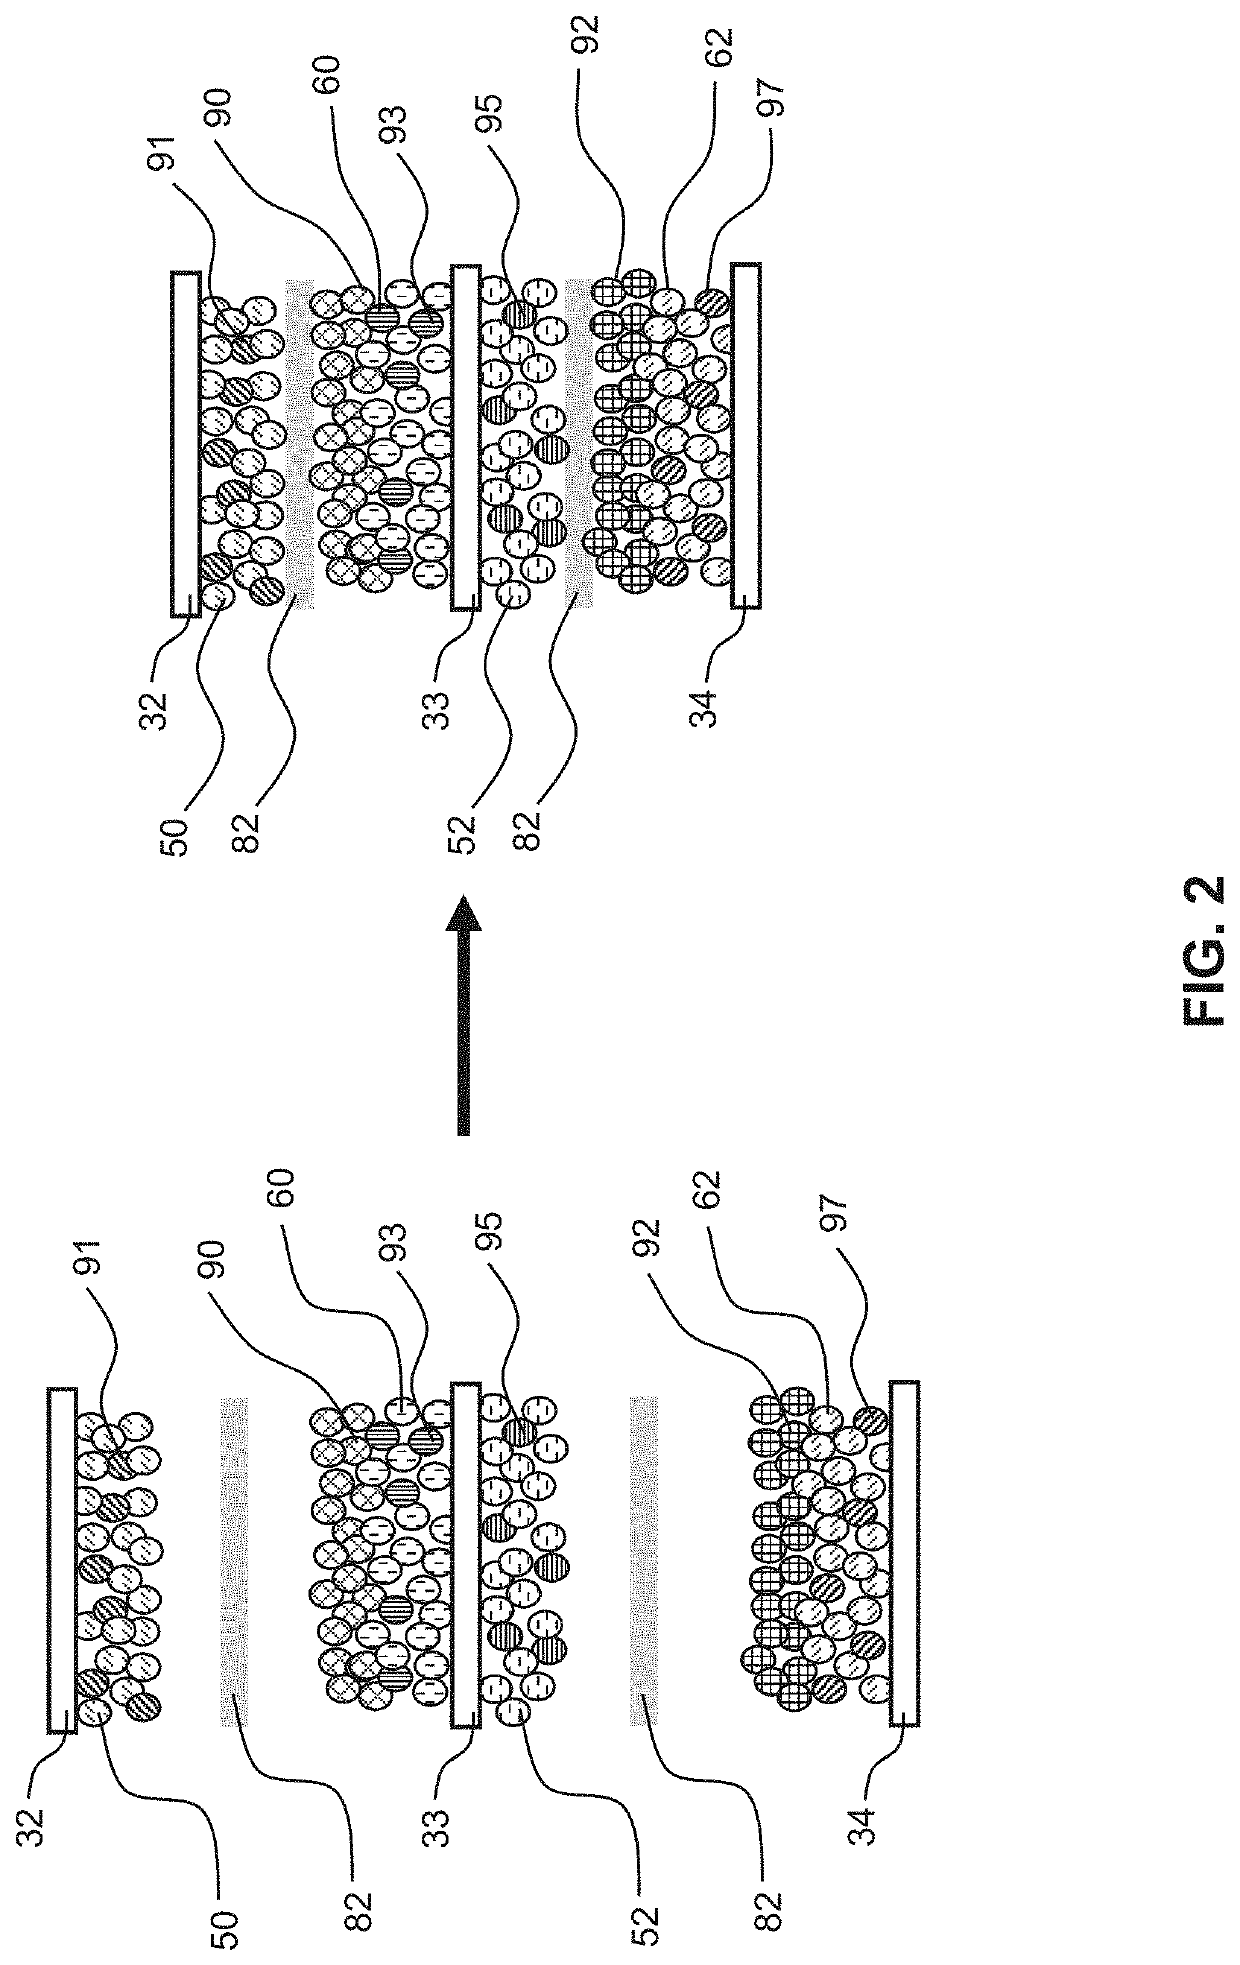 Bipolar solid-state battery with enhanced interfacial contact